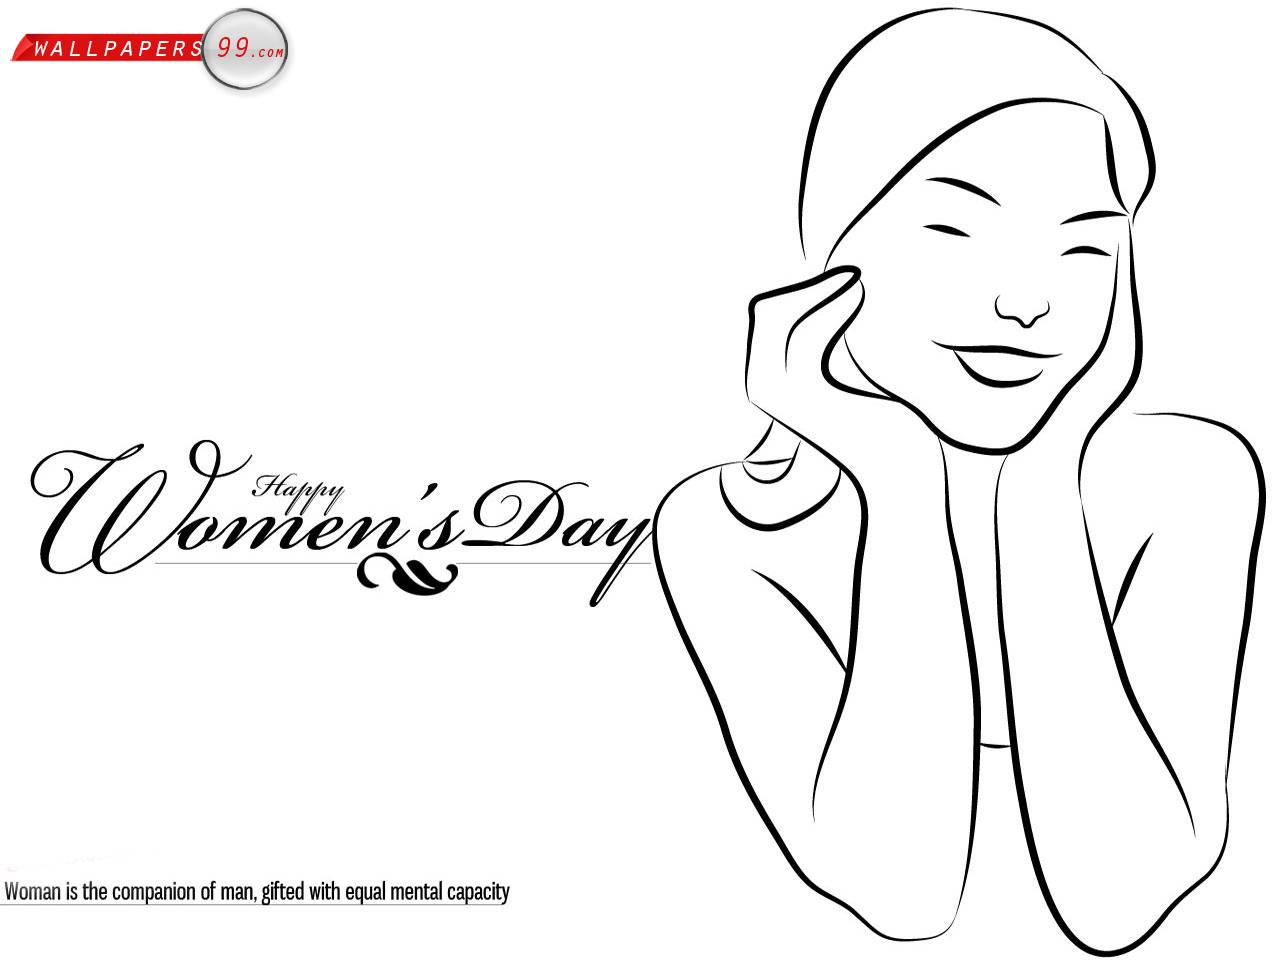 ... women's day, about international women s day, Download women's day